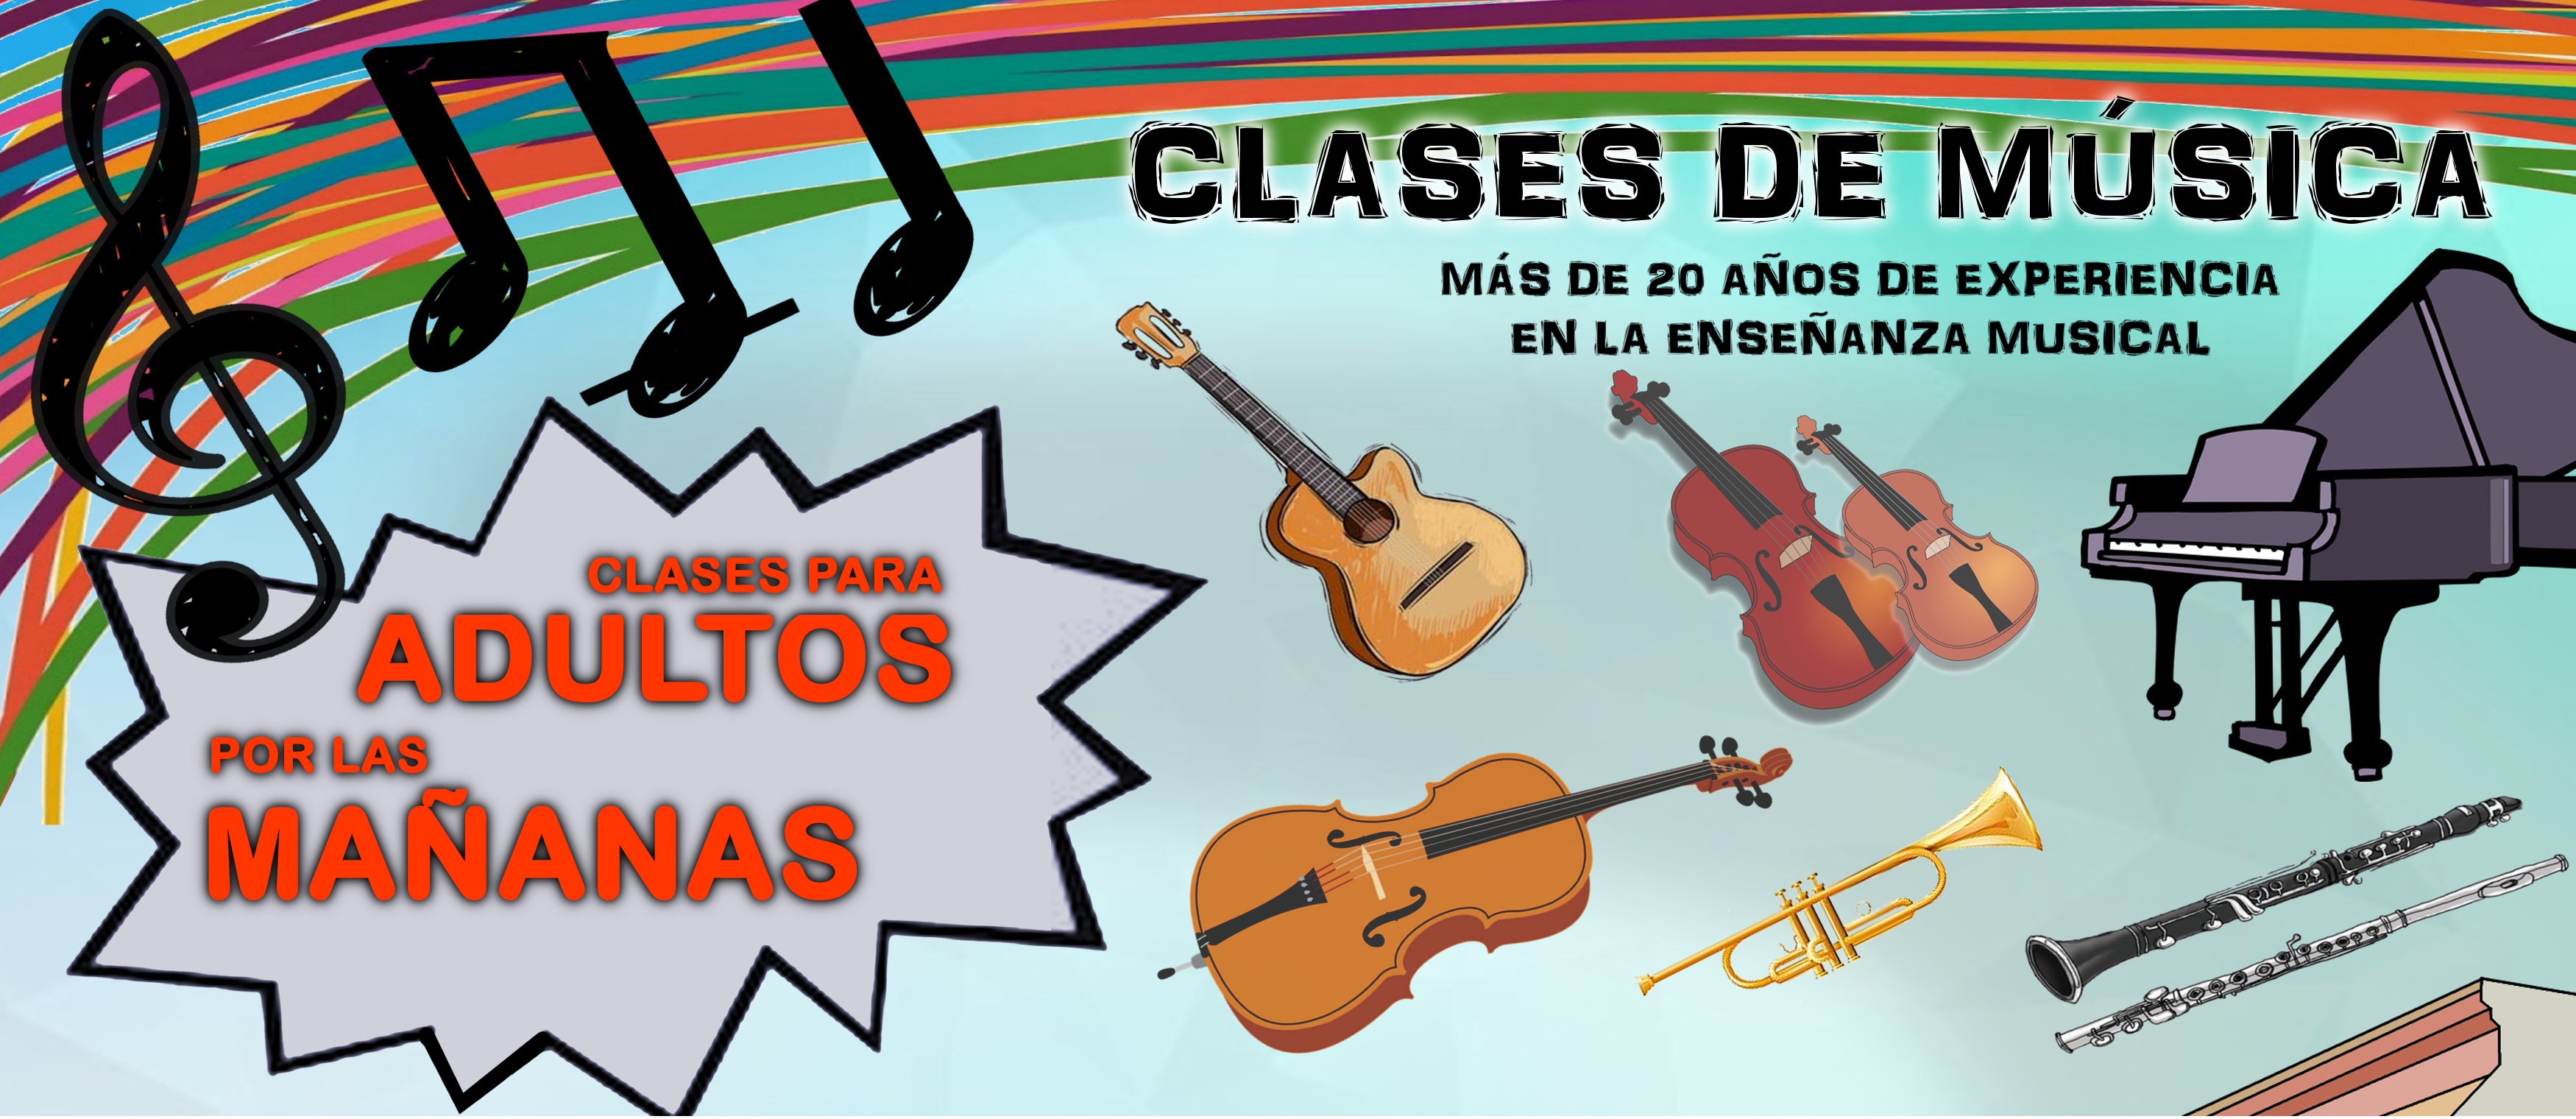 Clases Adultos